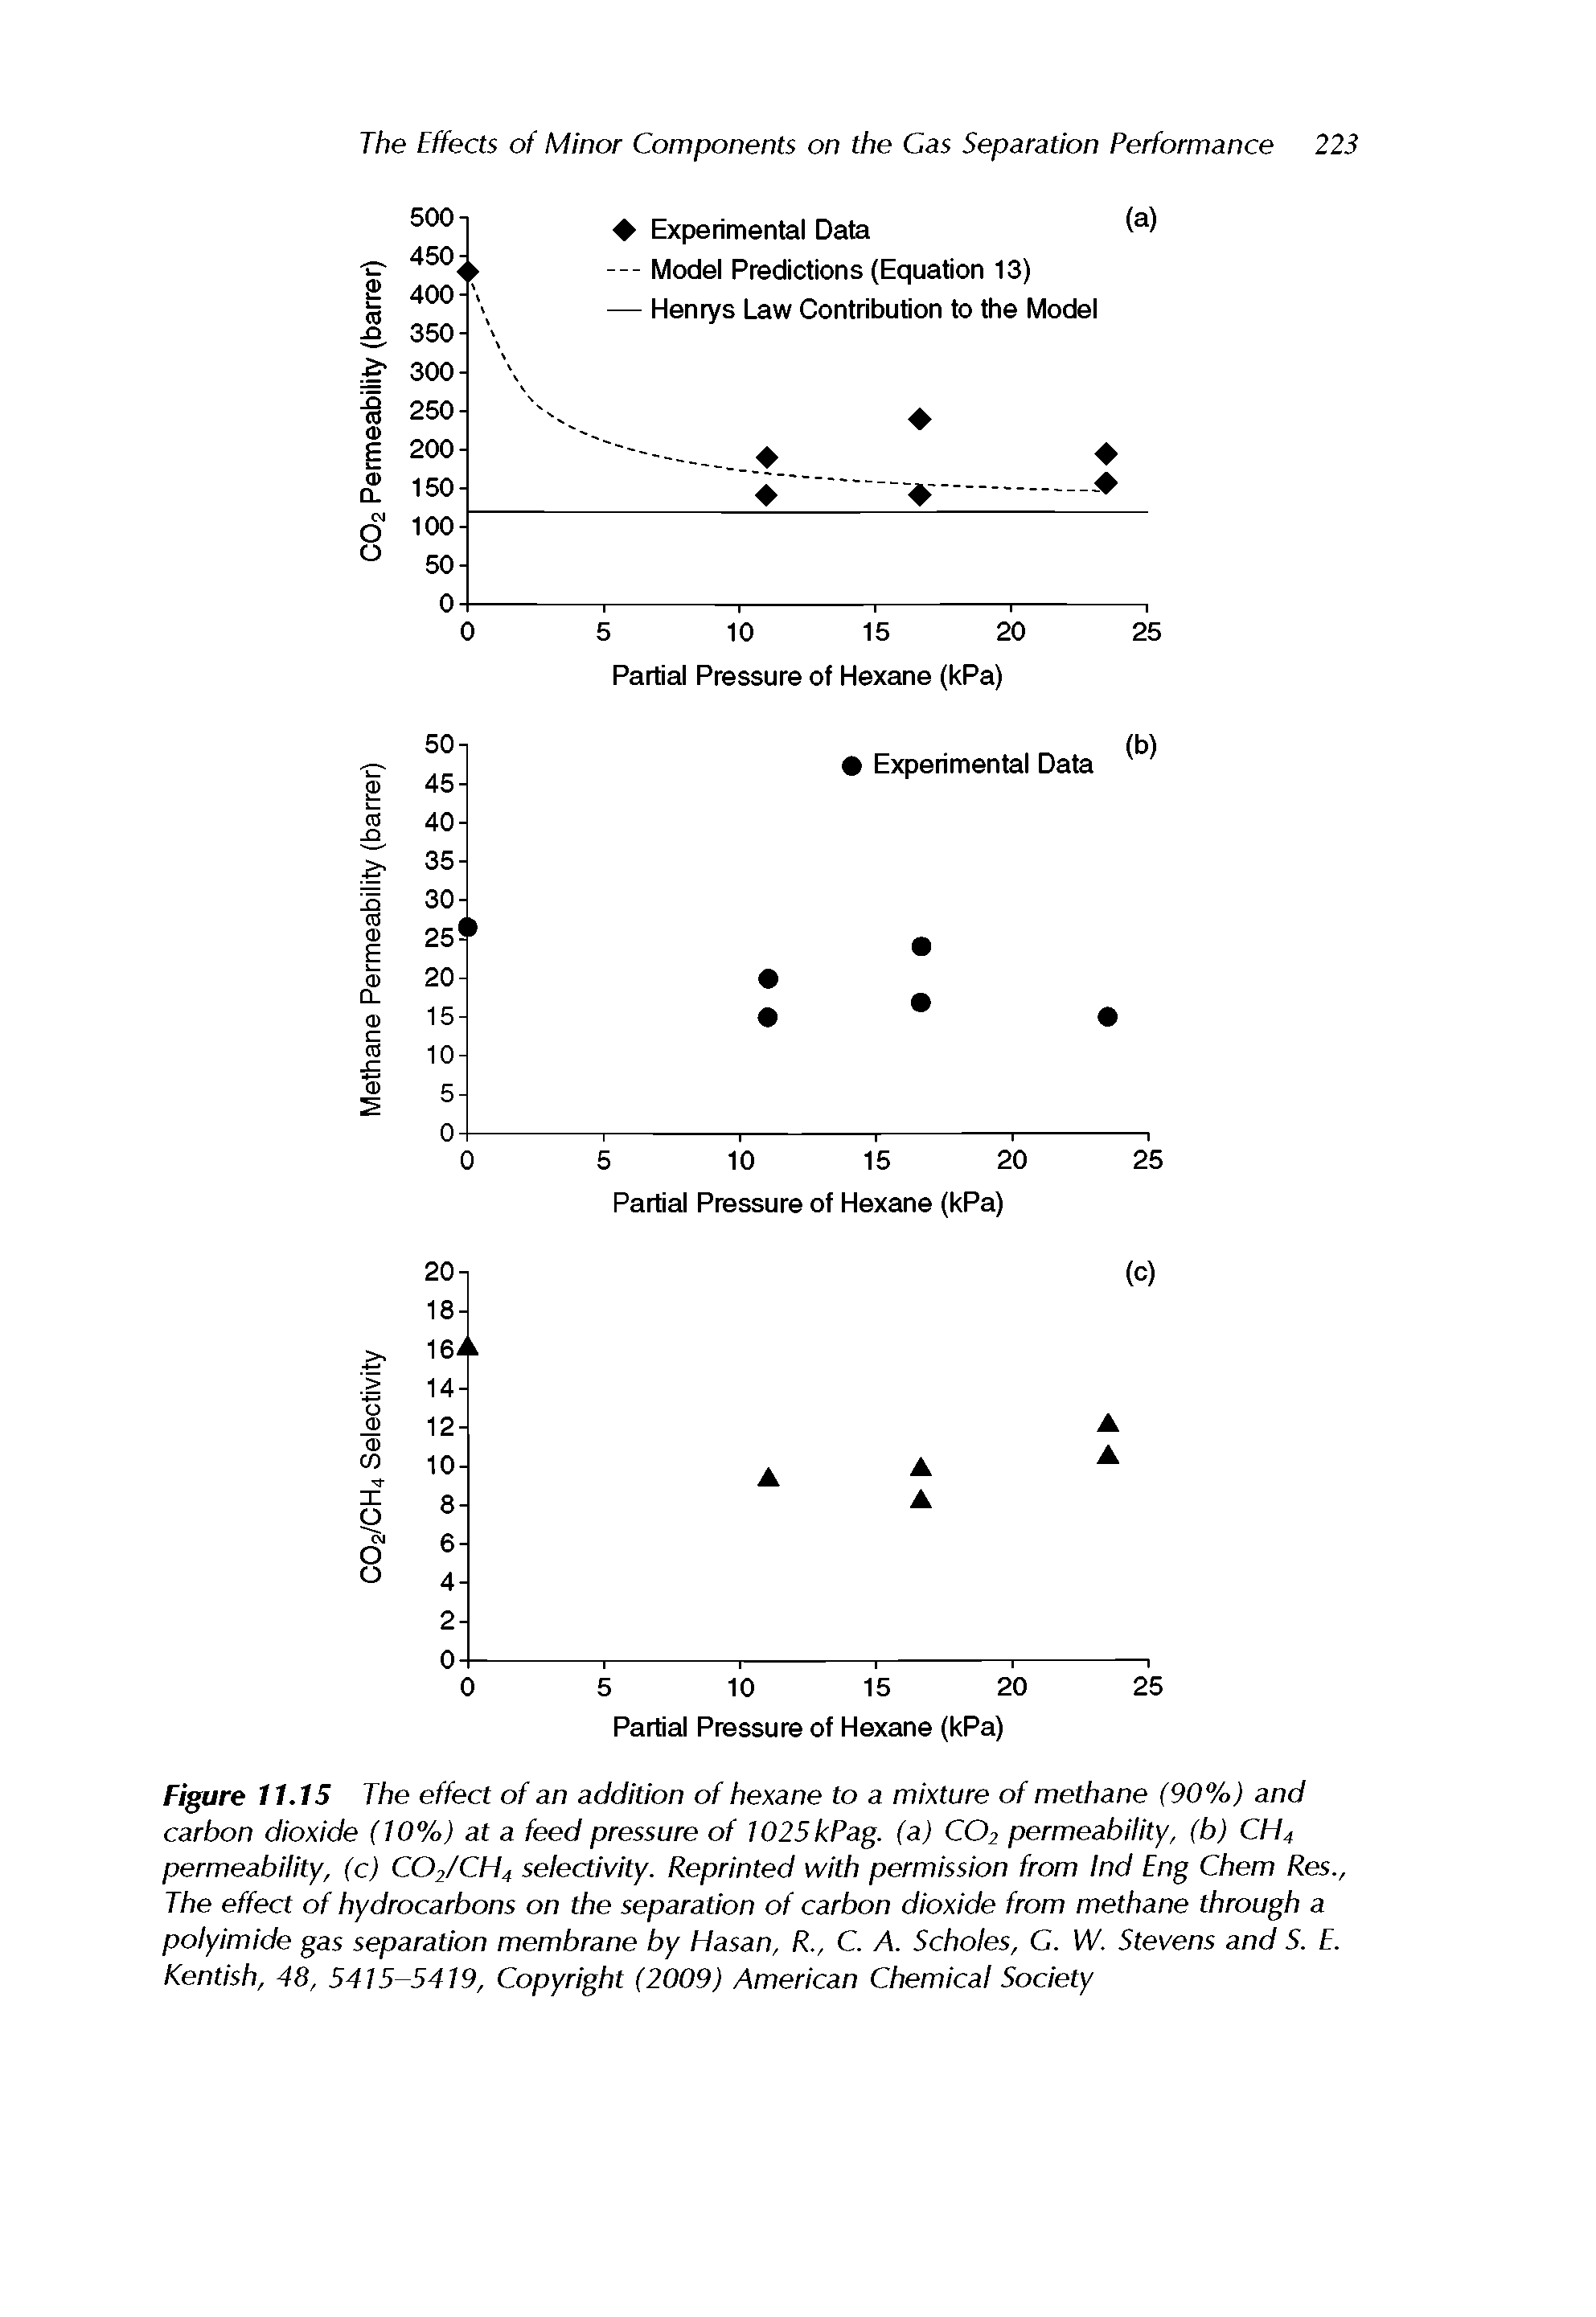 Figure 11.15 The effect of an addition of hexane to a mixture of methane (90%) and carbon dioxide (10%) at a feed pressure of 1025kPag. (a) CO2 permeability, (b) CH4 permeability, (c) CO2/CH4 selectivity. Reprinted with permission from Ind Eng Chem Res., The effect of hydrocarbons on the separation of carbon dioxide from methane through a polyimide gas separation membrane by Hasan, R., C. A. Scholes, C. W. Stevens and S. E. Kentish, 48, 5415-5419, Copyright (2009) American Chemical Society...